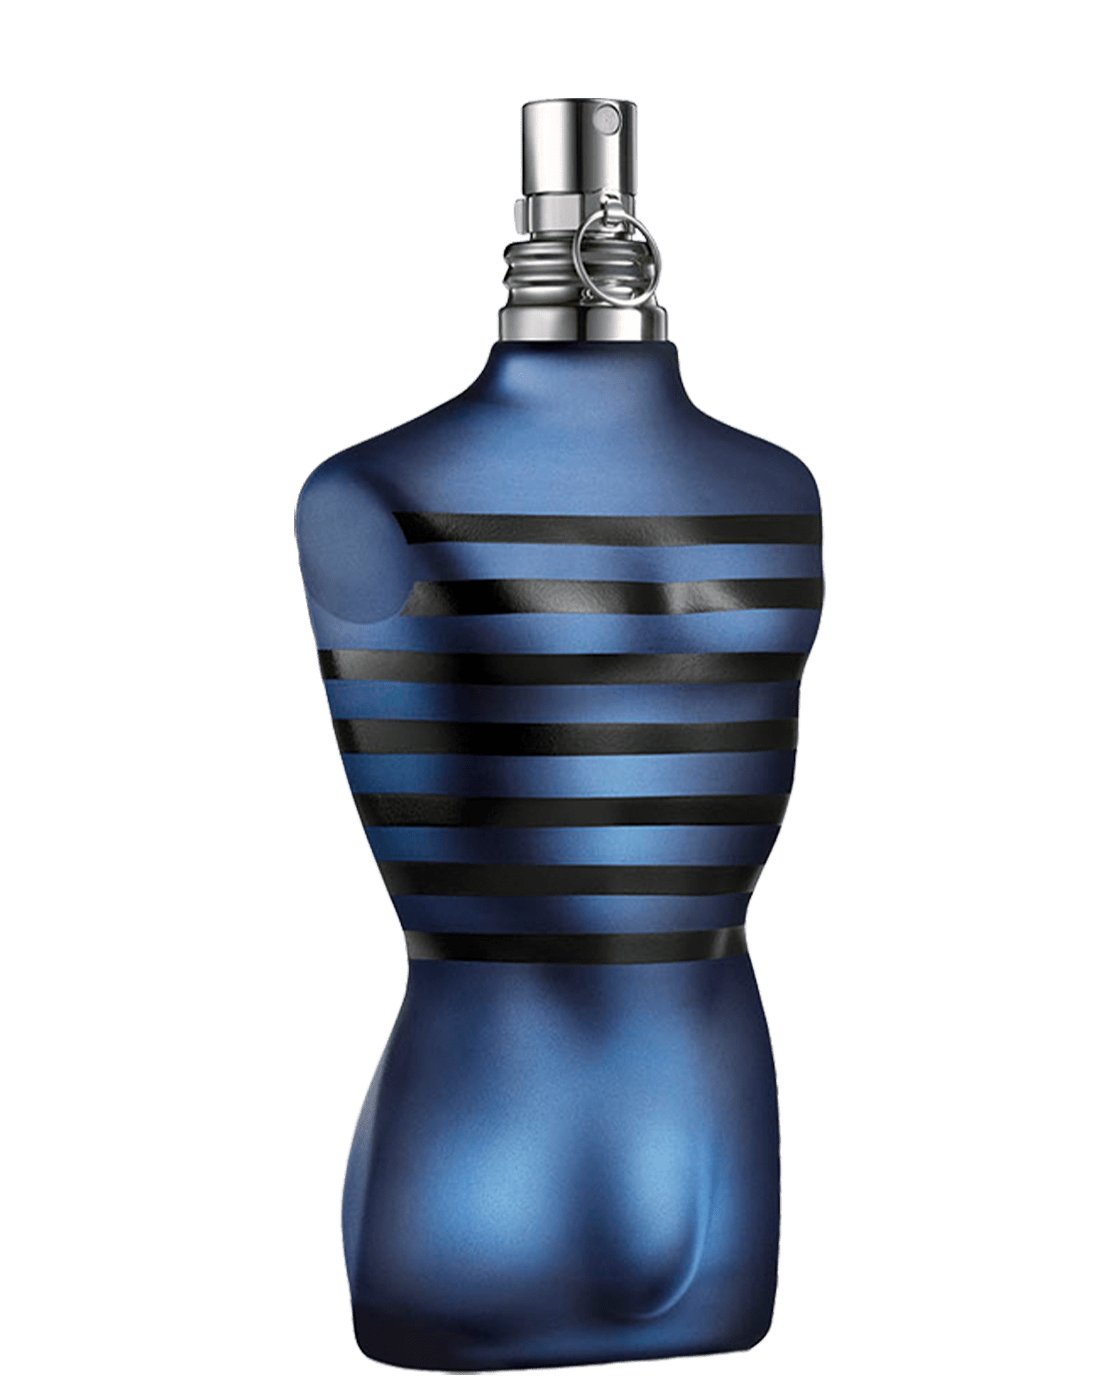 Jean Paul Gaultier's Ultra Male: welcome to the dark side – The